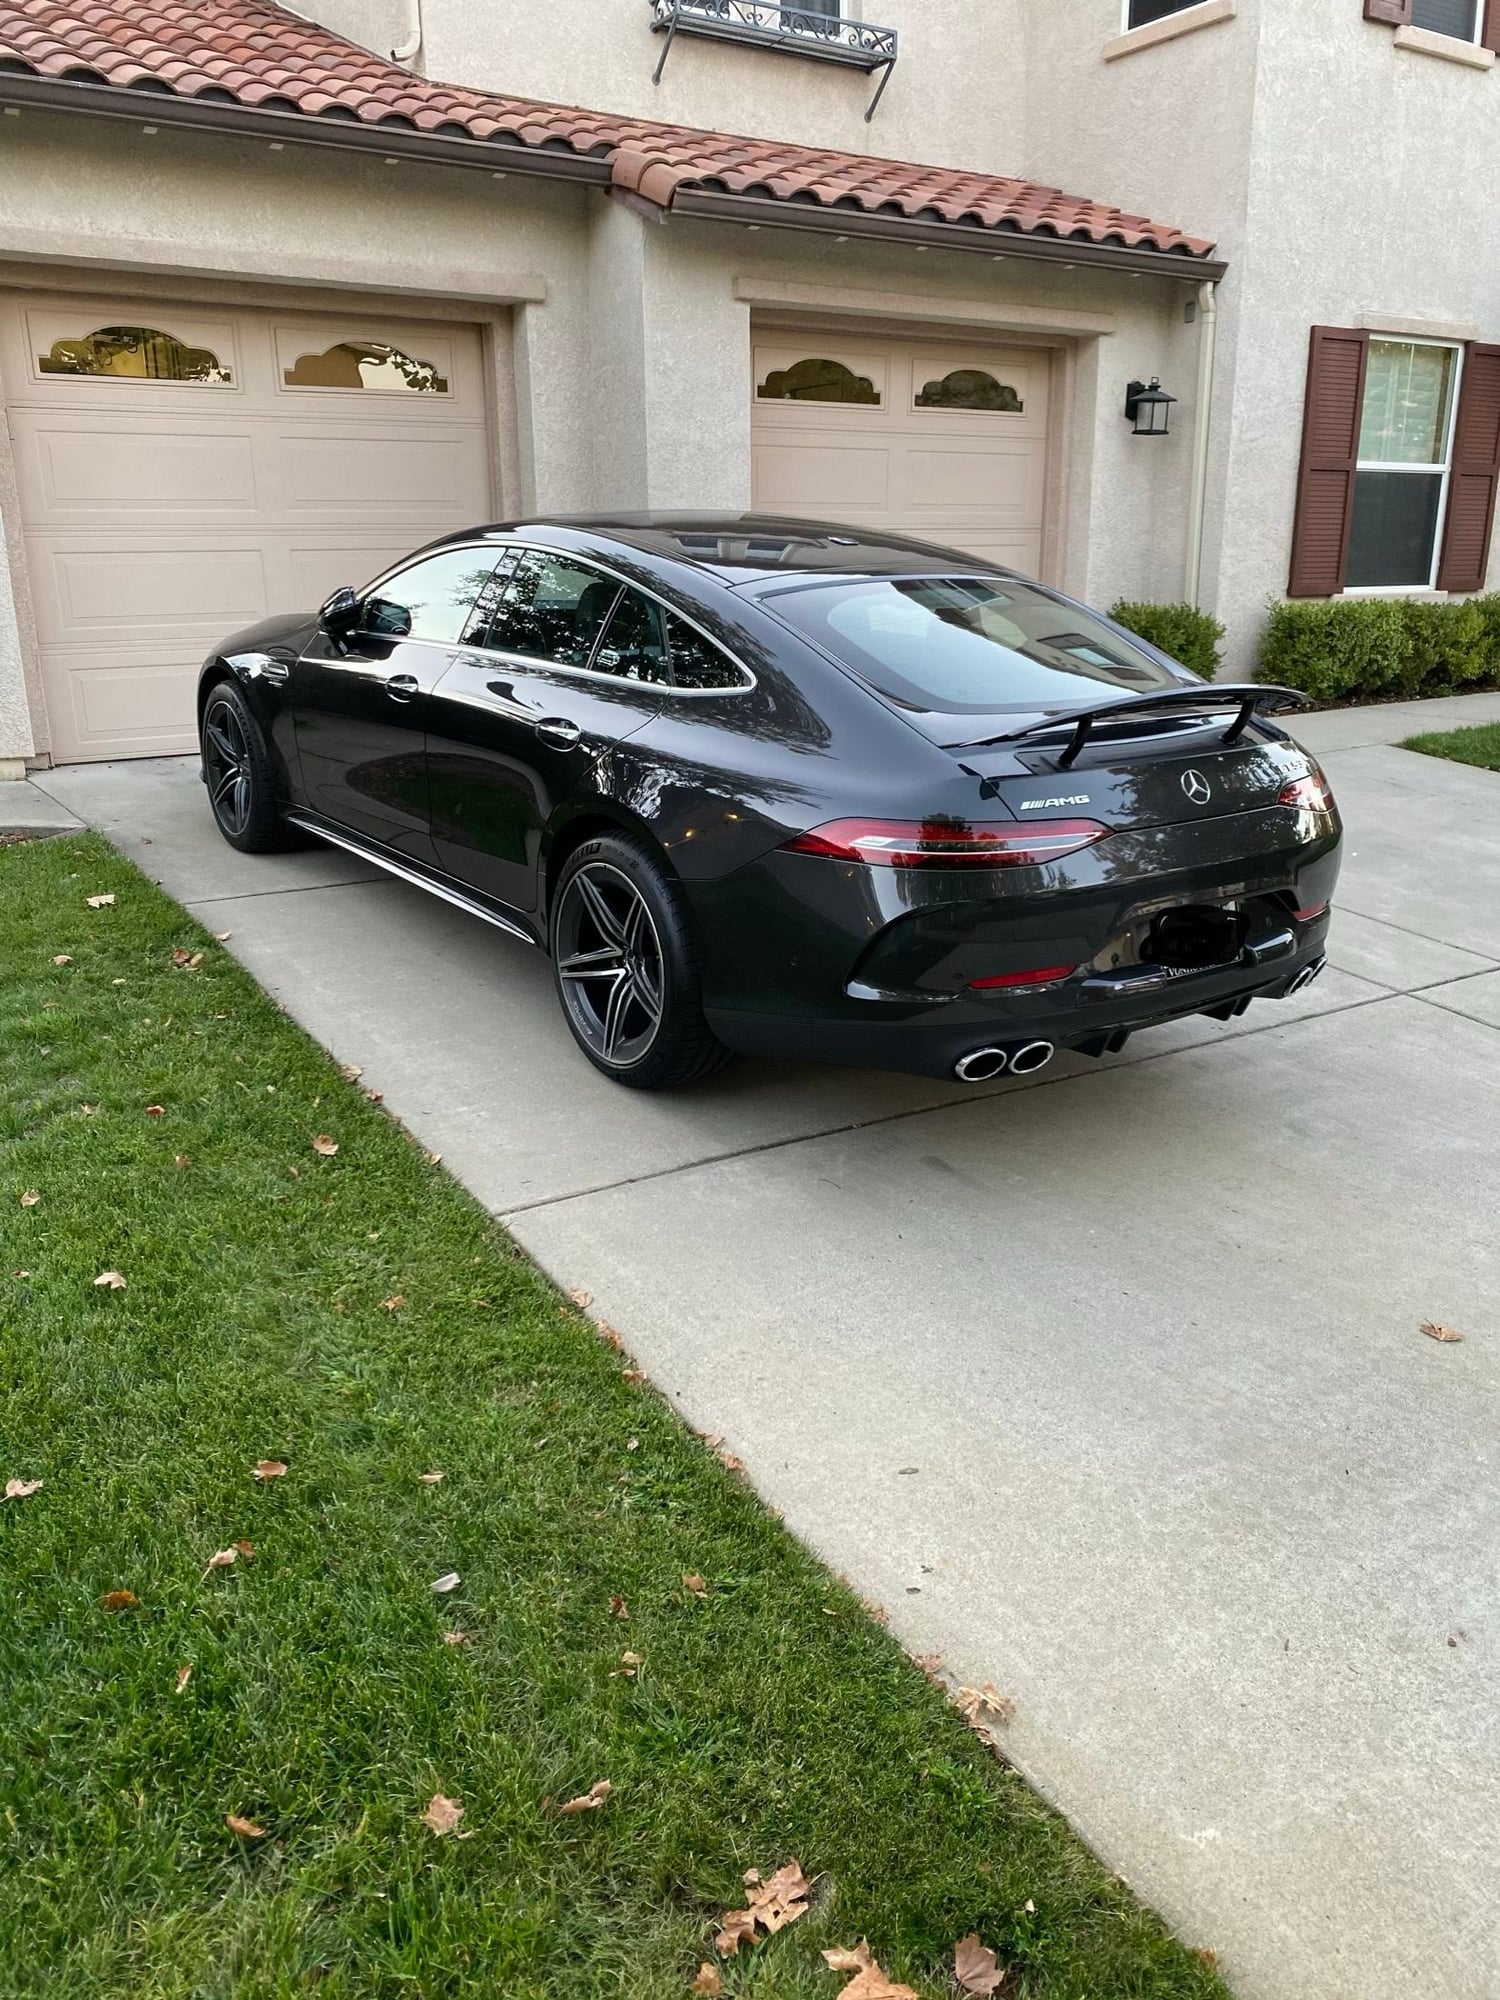 2019 Mercedes-Benz AMG GT 53 - 2019 AMG GT 53 for Lease Trade - 1850/mo all taxes included, 0 down, +incentive! - New - VIN WDD7X6BB9KA003784 - 3,150 Miles - 6 cyl - AWD - Automatic - Coupe - Gray - Roseville, CA 95747, United States